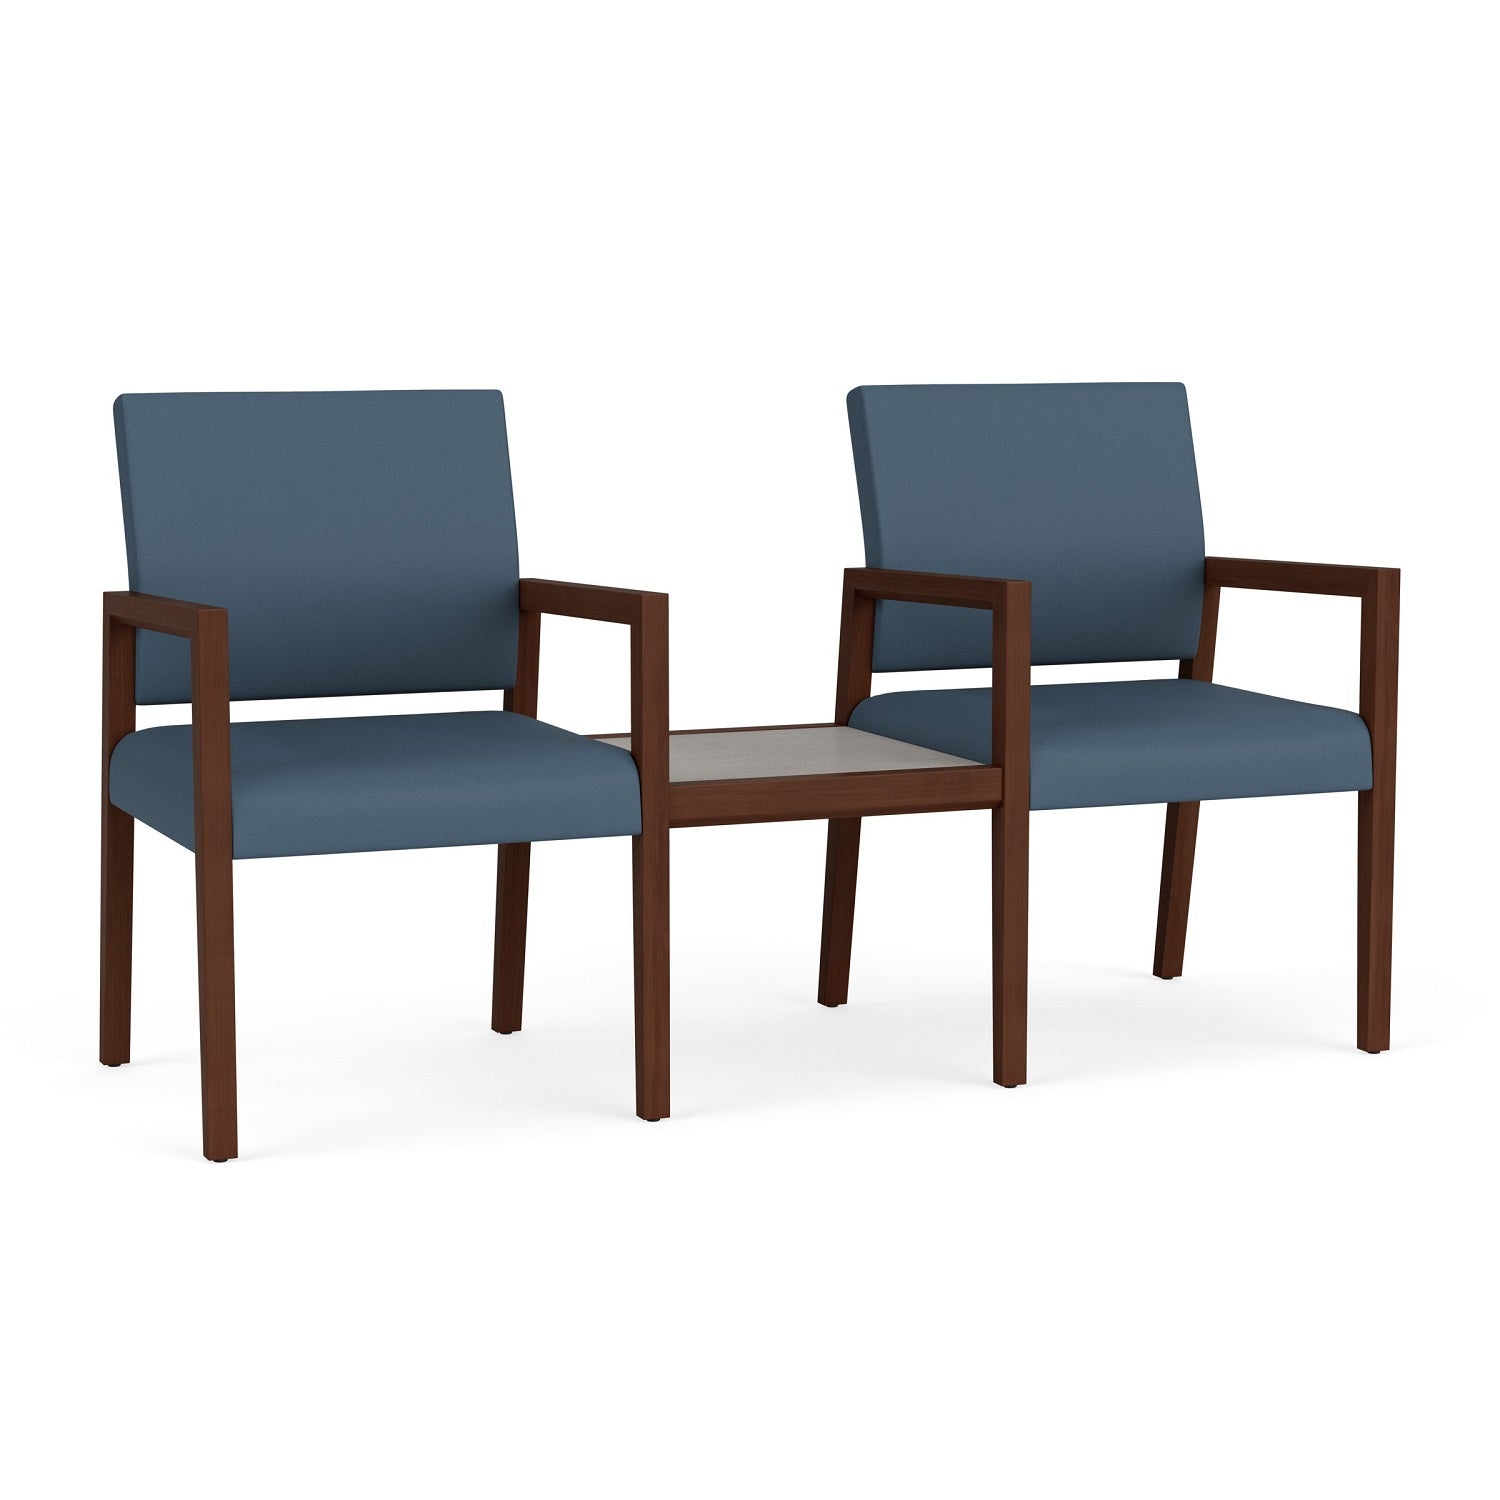 Brooklyn Collection Reception Seating, 2 Chairs with Connecting Center Table, Standard Vinyl Upholstery, FREE SHIPPING